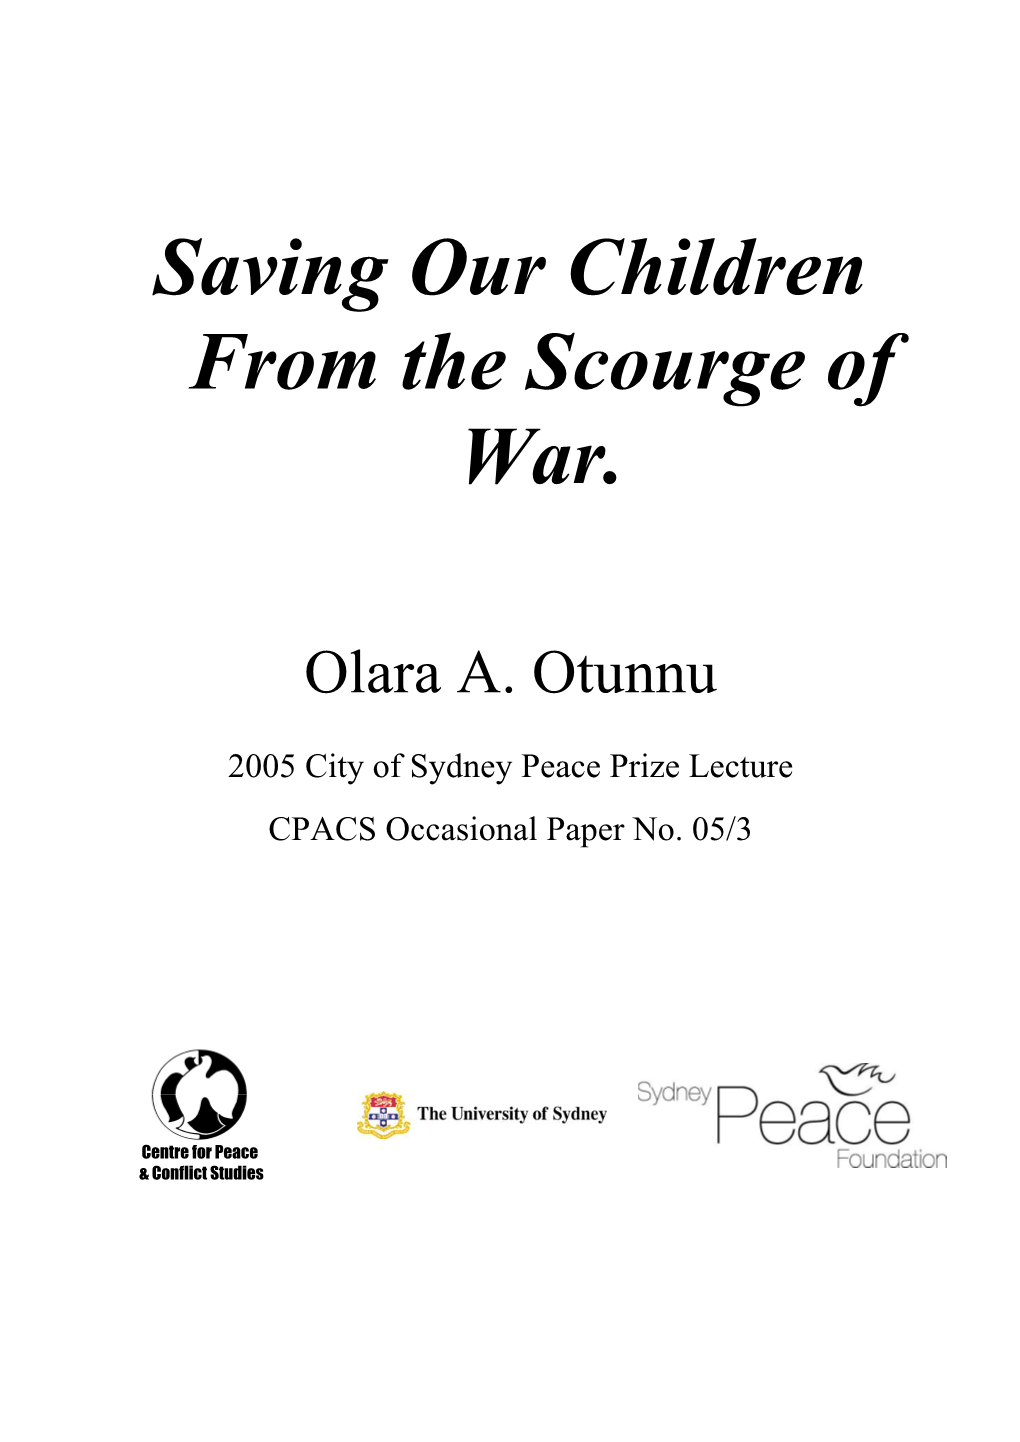 Saving Our Children from the Scourge of War